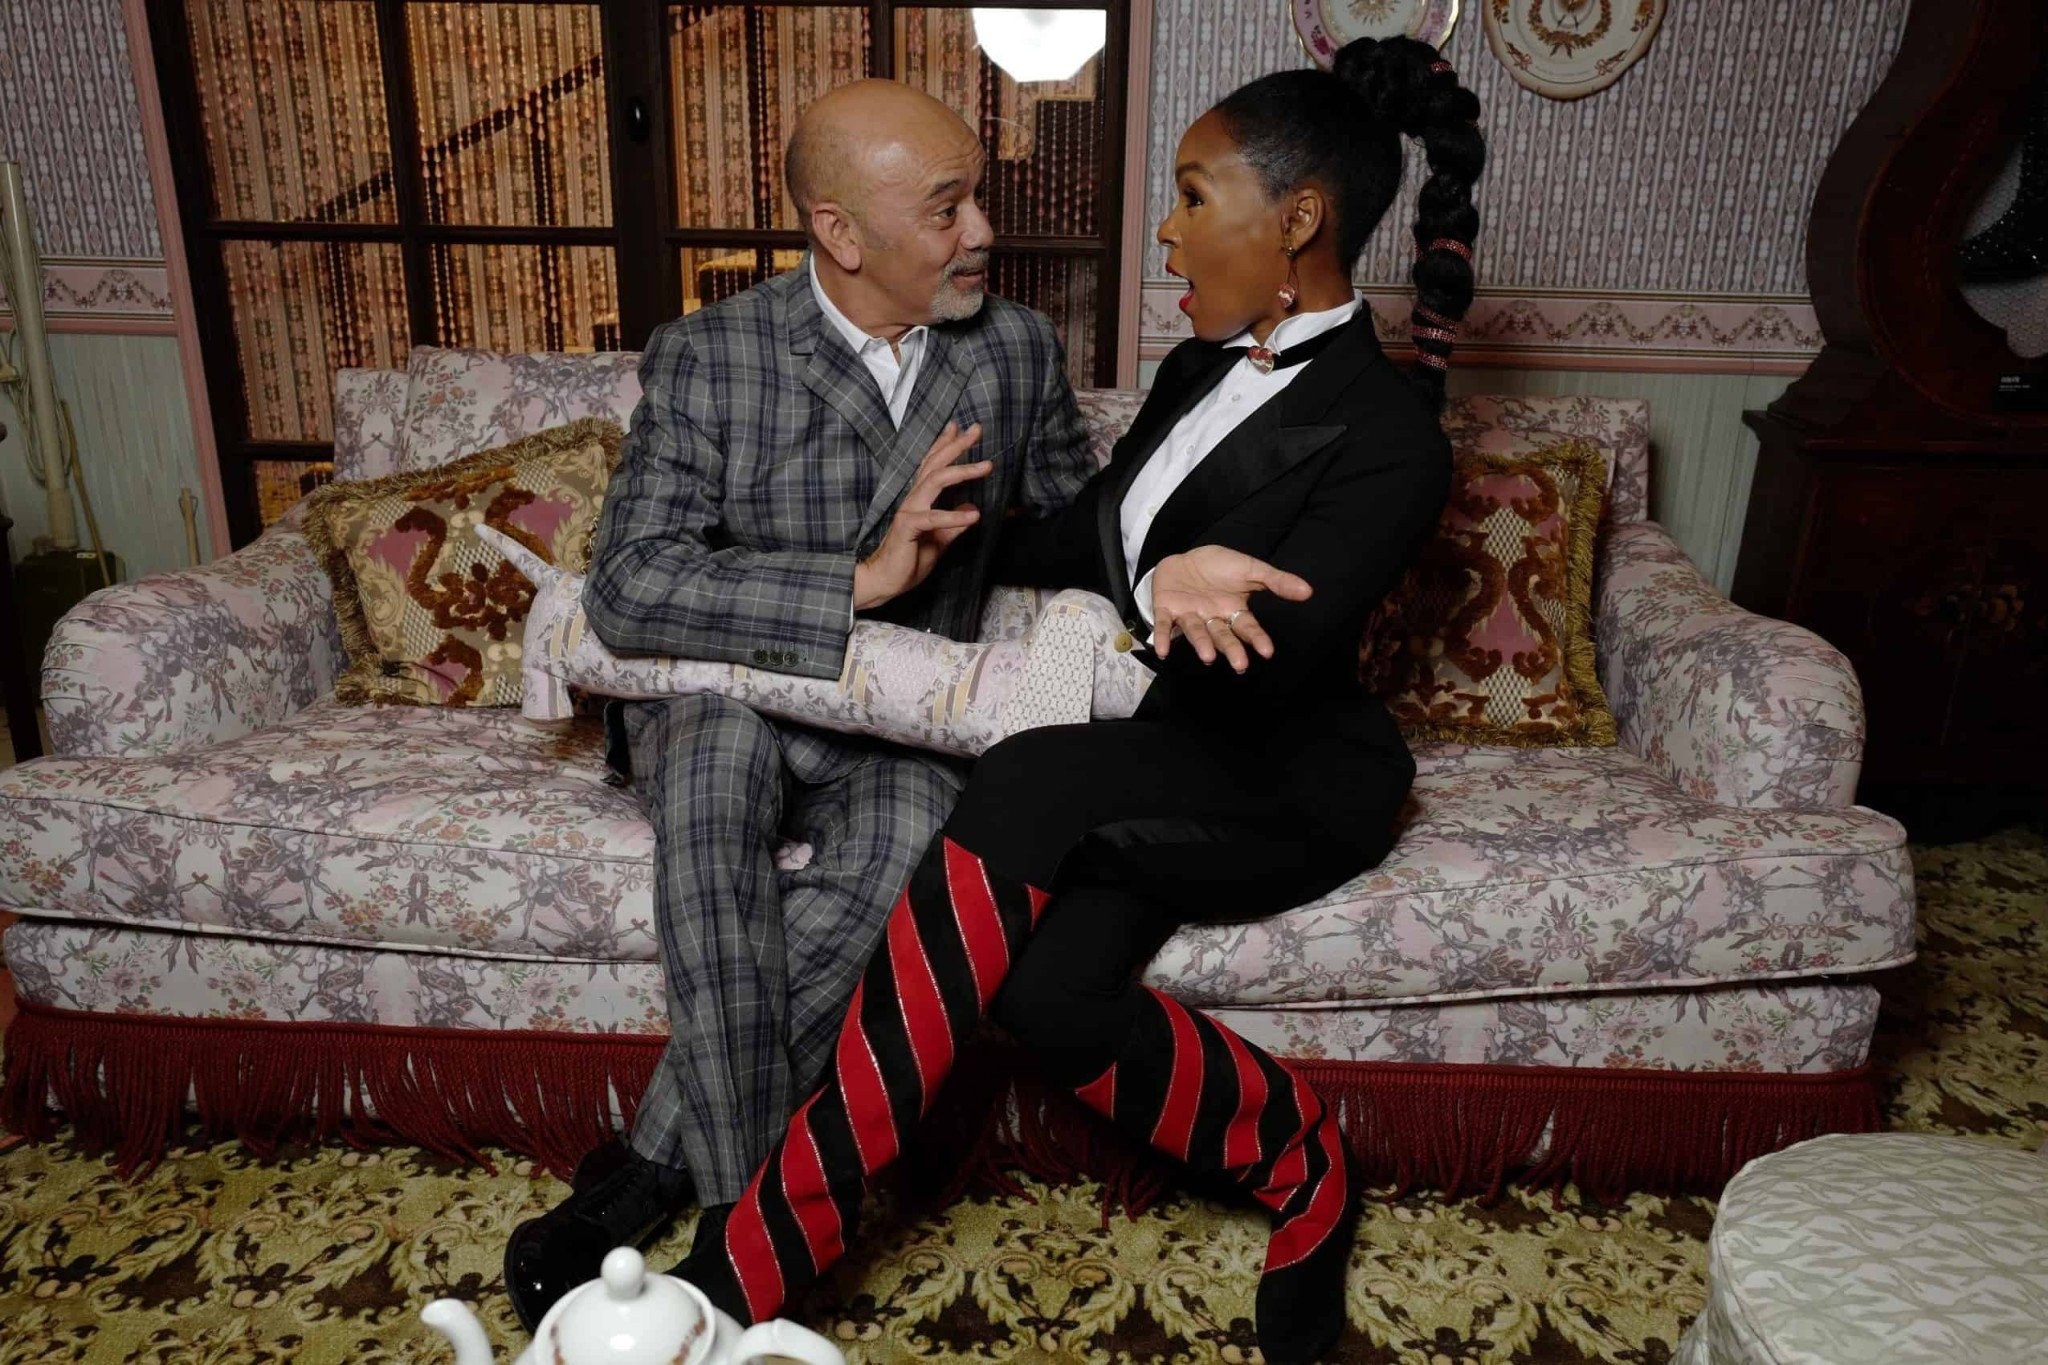 janelle-monae-and-christian-louboutin-at-the-opening-of-lexhibitionniste-c-stephane-feugere-1-scaled.jpg